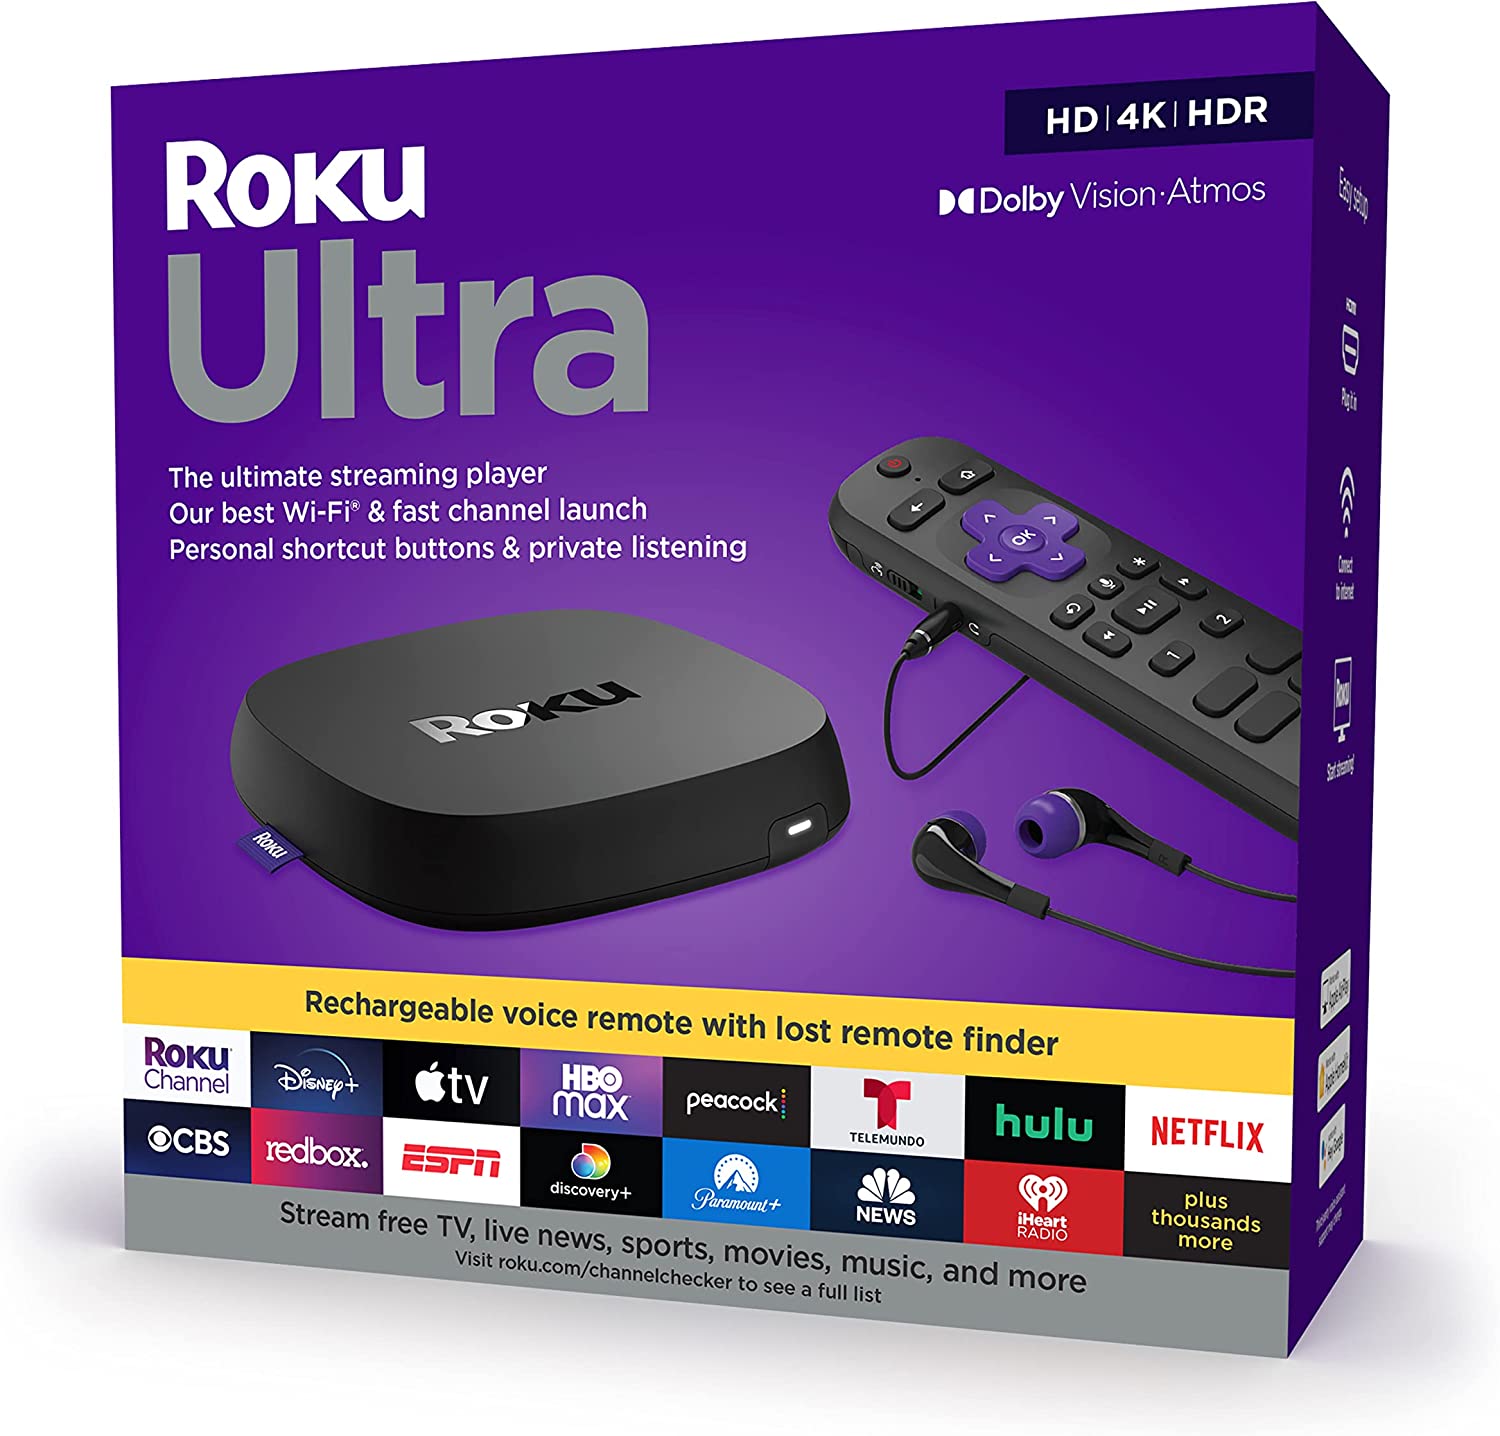 Ends Tonight! Giveaway! Enter Now to Win a 2022 Roku Ultra, $100 Netflix Gift Card, $100 in Hulu Gift Cards, & An Antennas Direct Antenna!